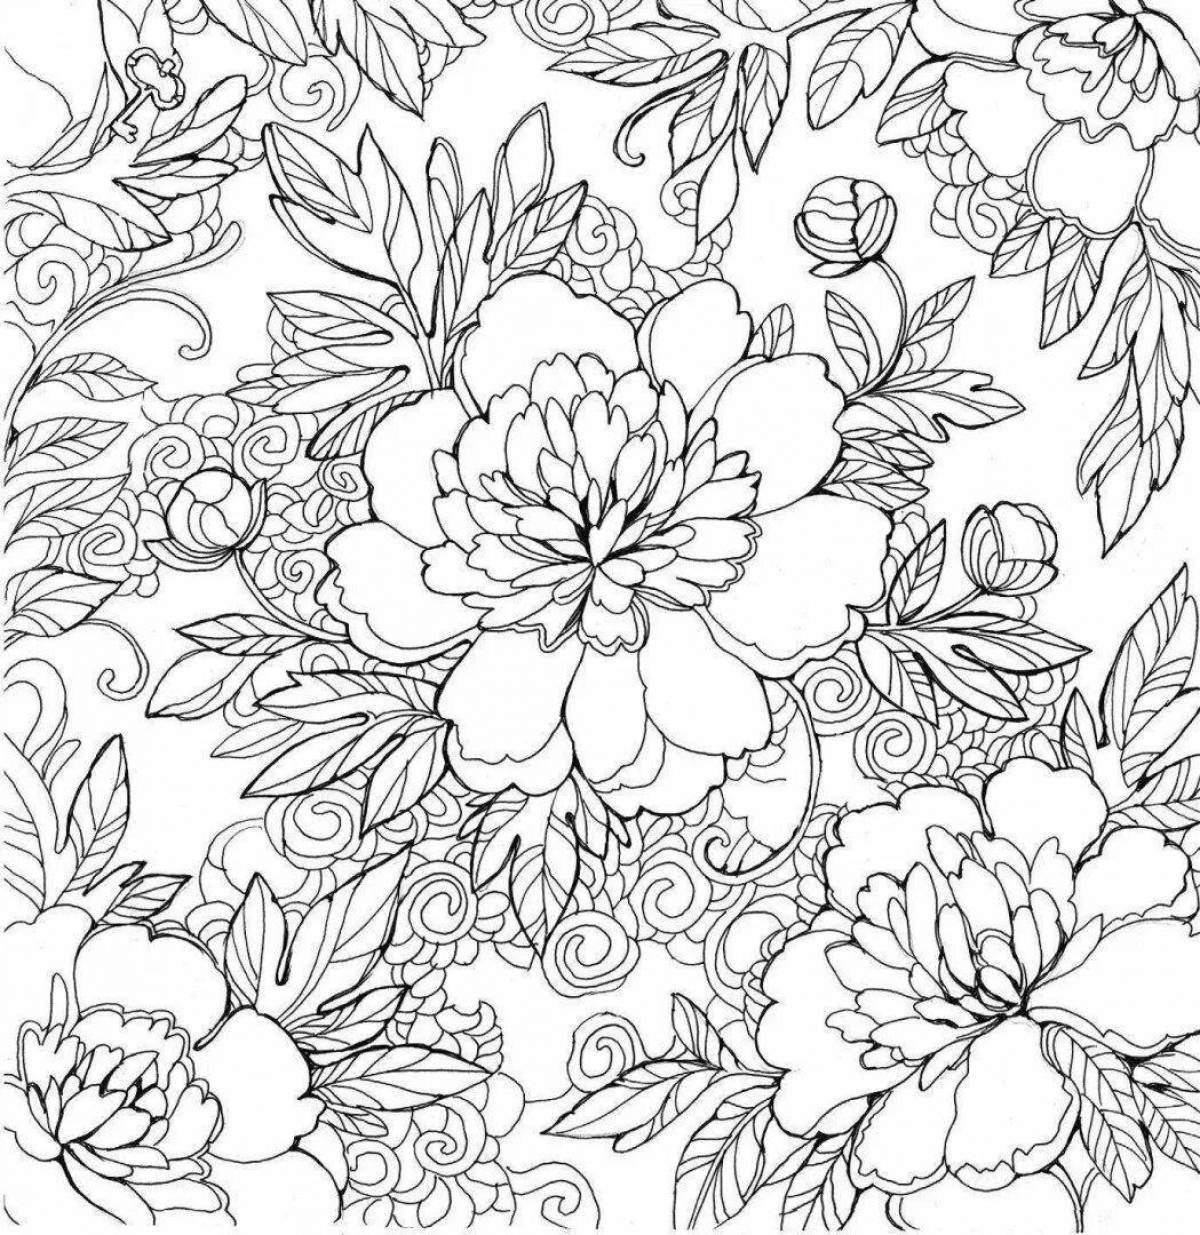 Sparkle coloring page background